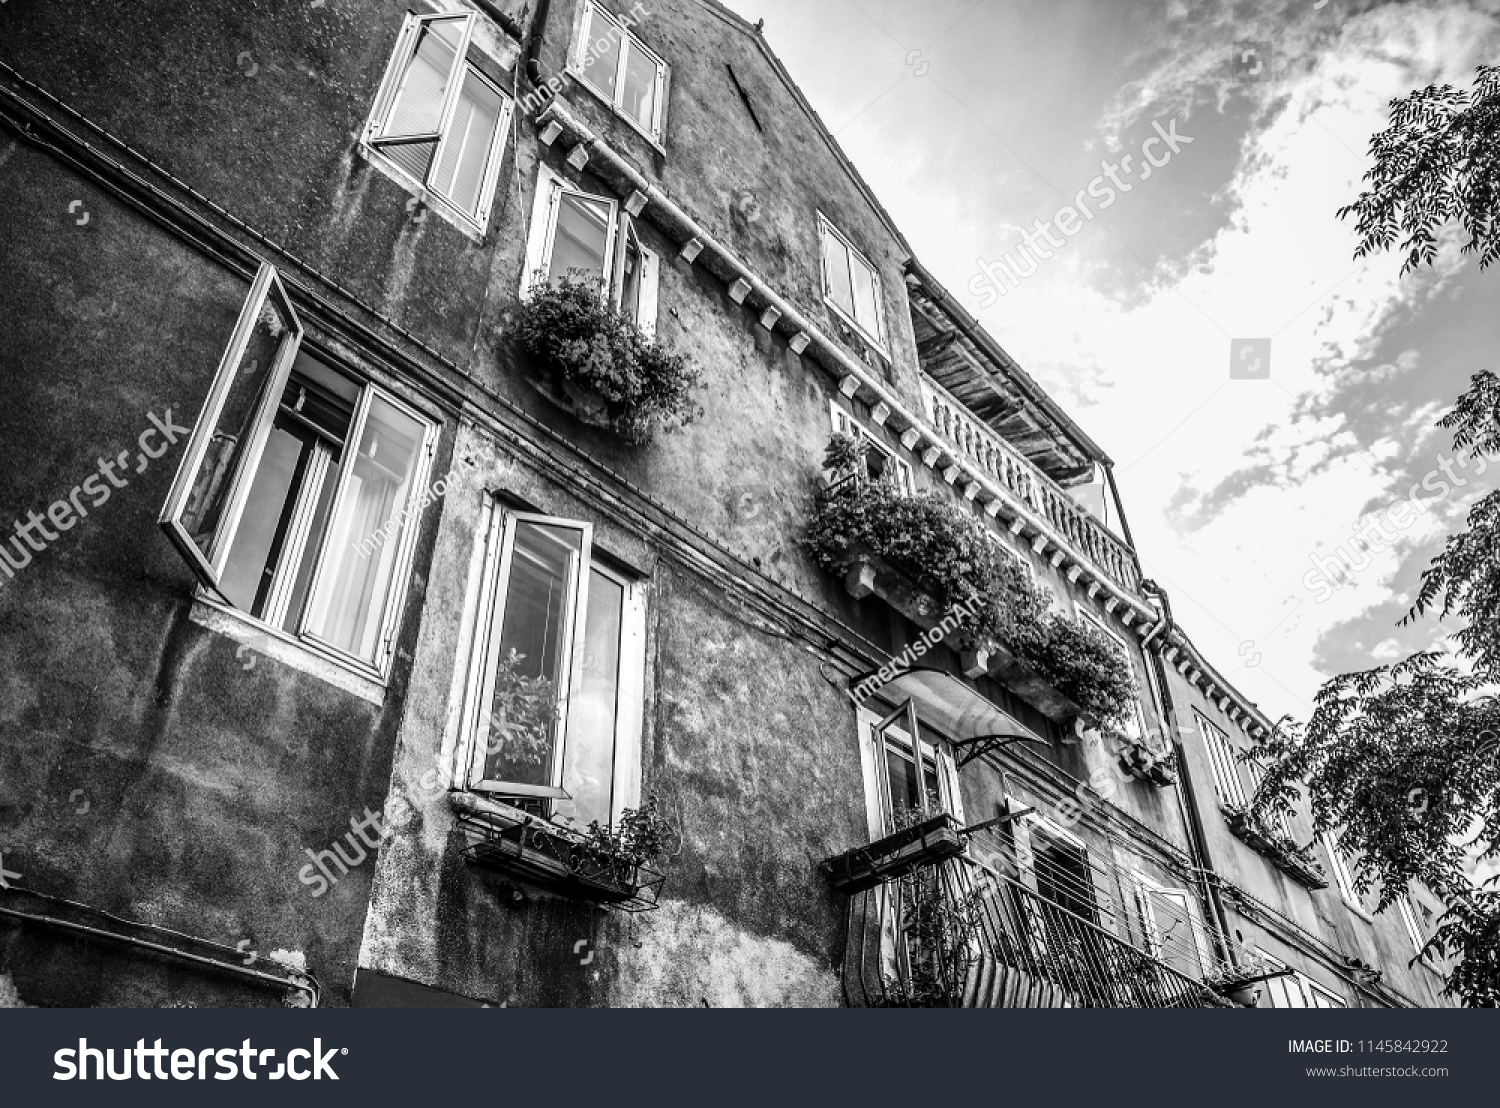 MURANO, ITALY - AUGUST 19, 2016: Famous architectural monuments and facades of old medieval buildings. Black-white photo on August 19, 2016 in Murano, Italy. #1145842922